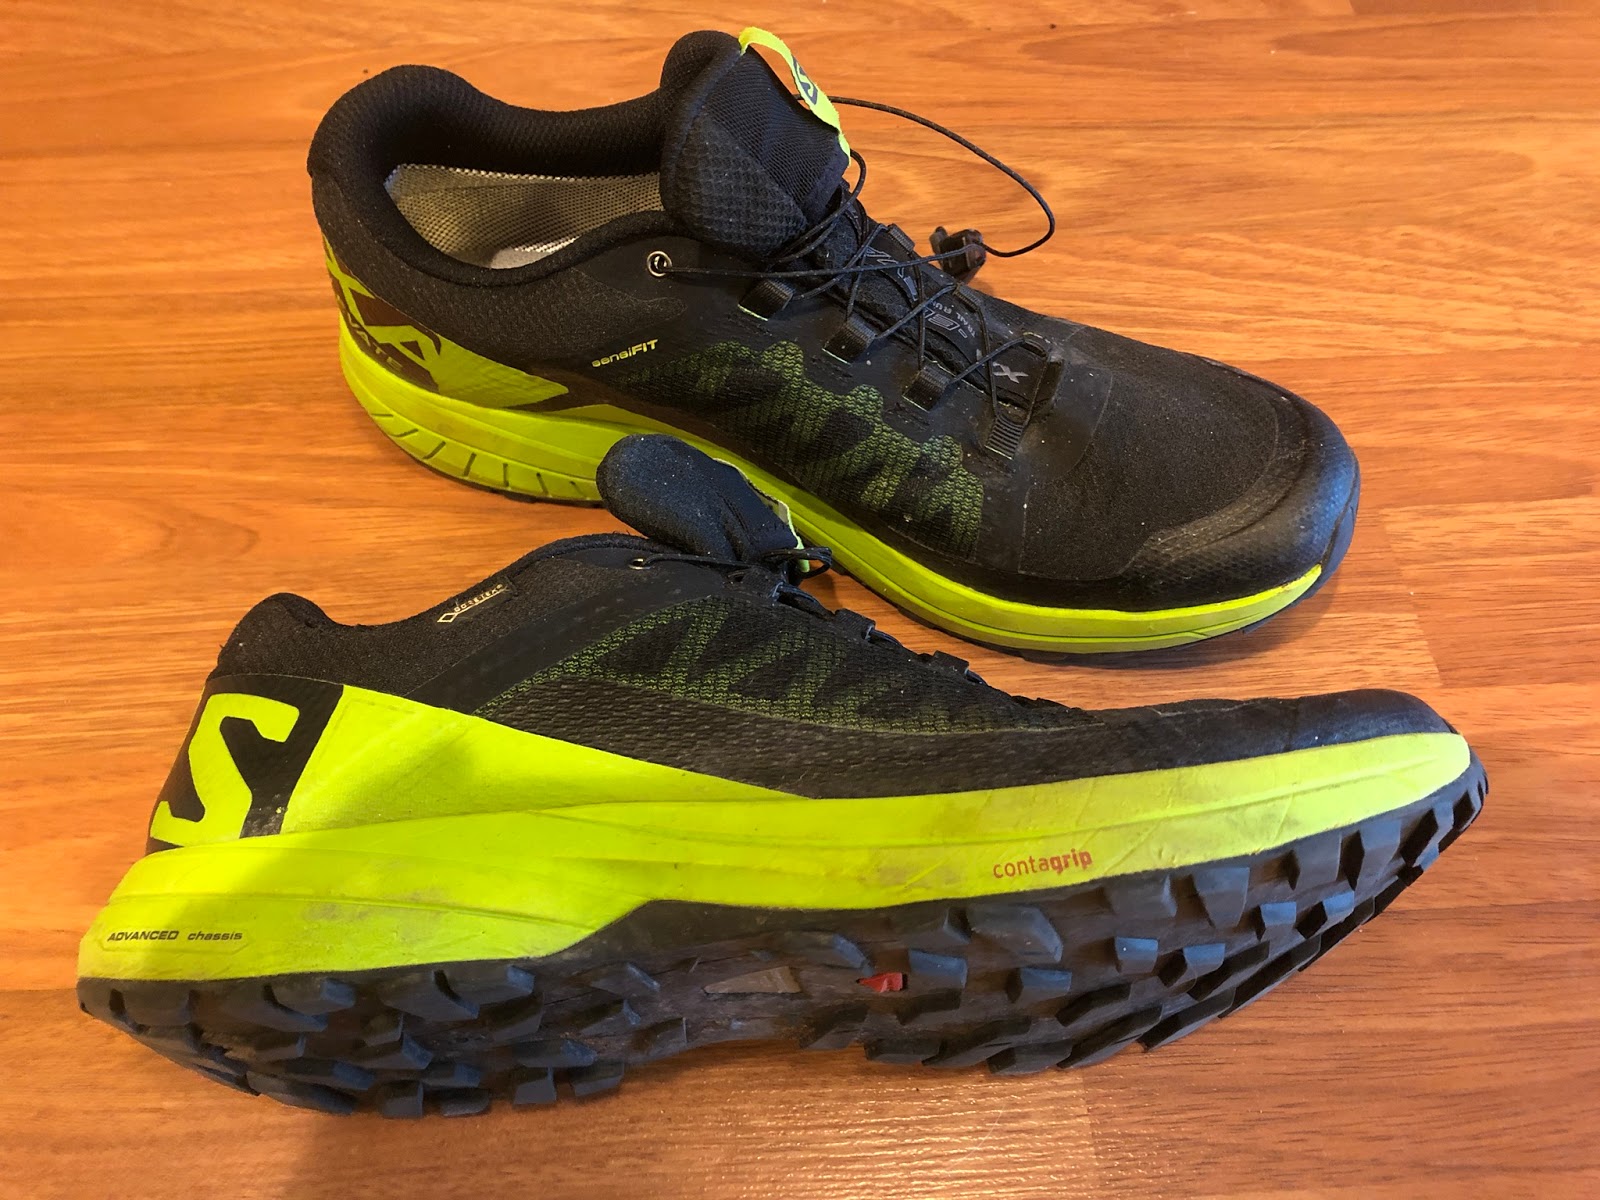 lilla Atlas Optø, optø, frost tø Road Trail Run: Salomon XA Elevate GTX Review - All of the Rugged,  Versatile Greatness of the XA Elevate with Added Waterproof Protection